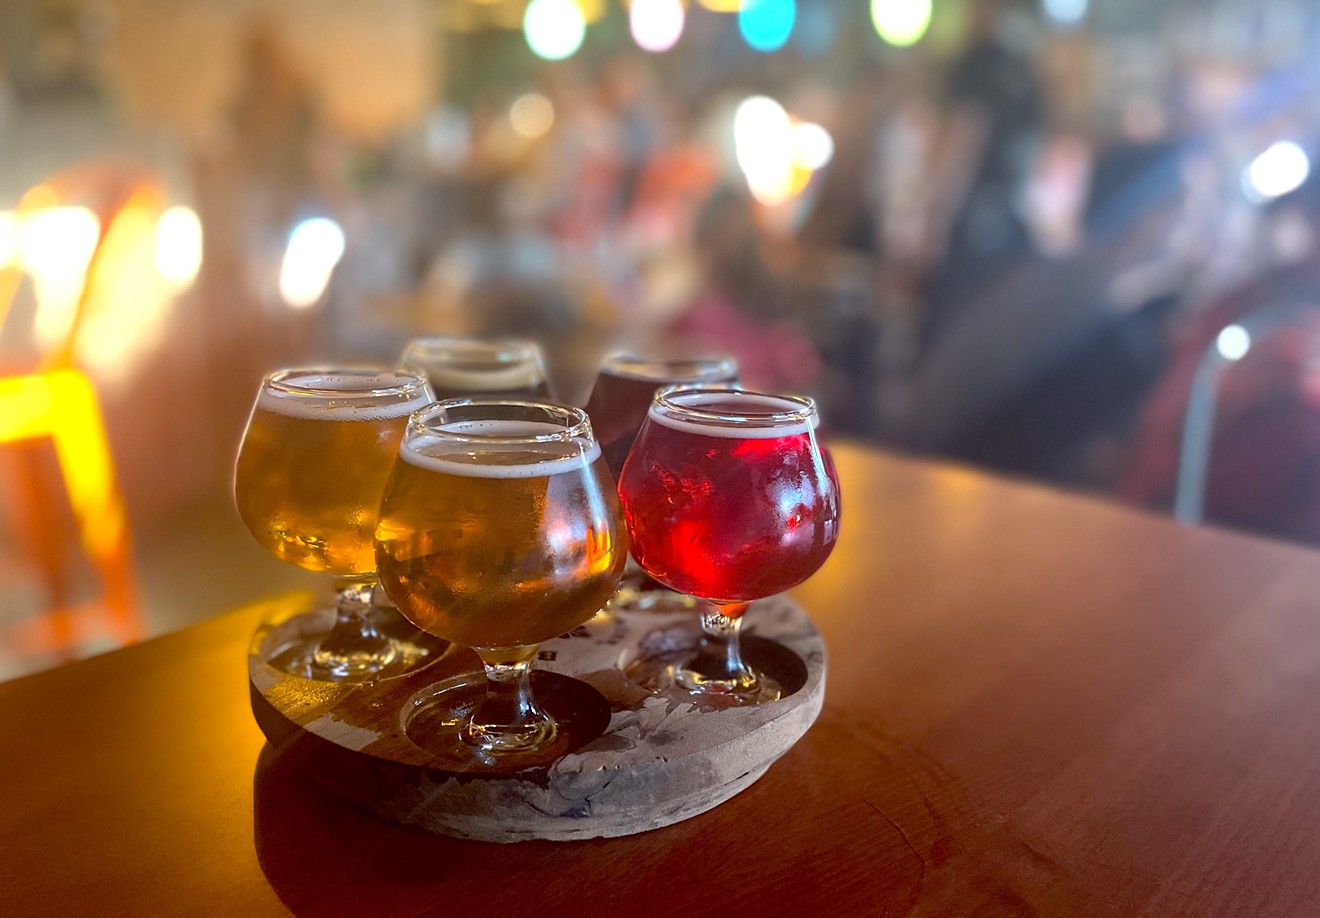 Buqui Bichi Brewing's Chandler taproom features 12 beers from the Sonoran brewer.